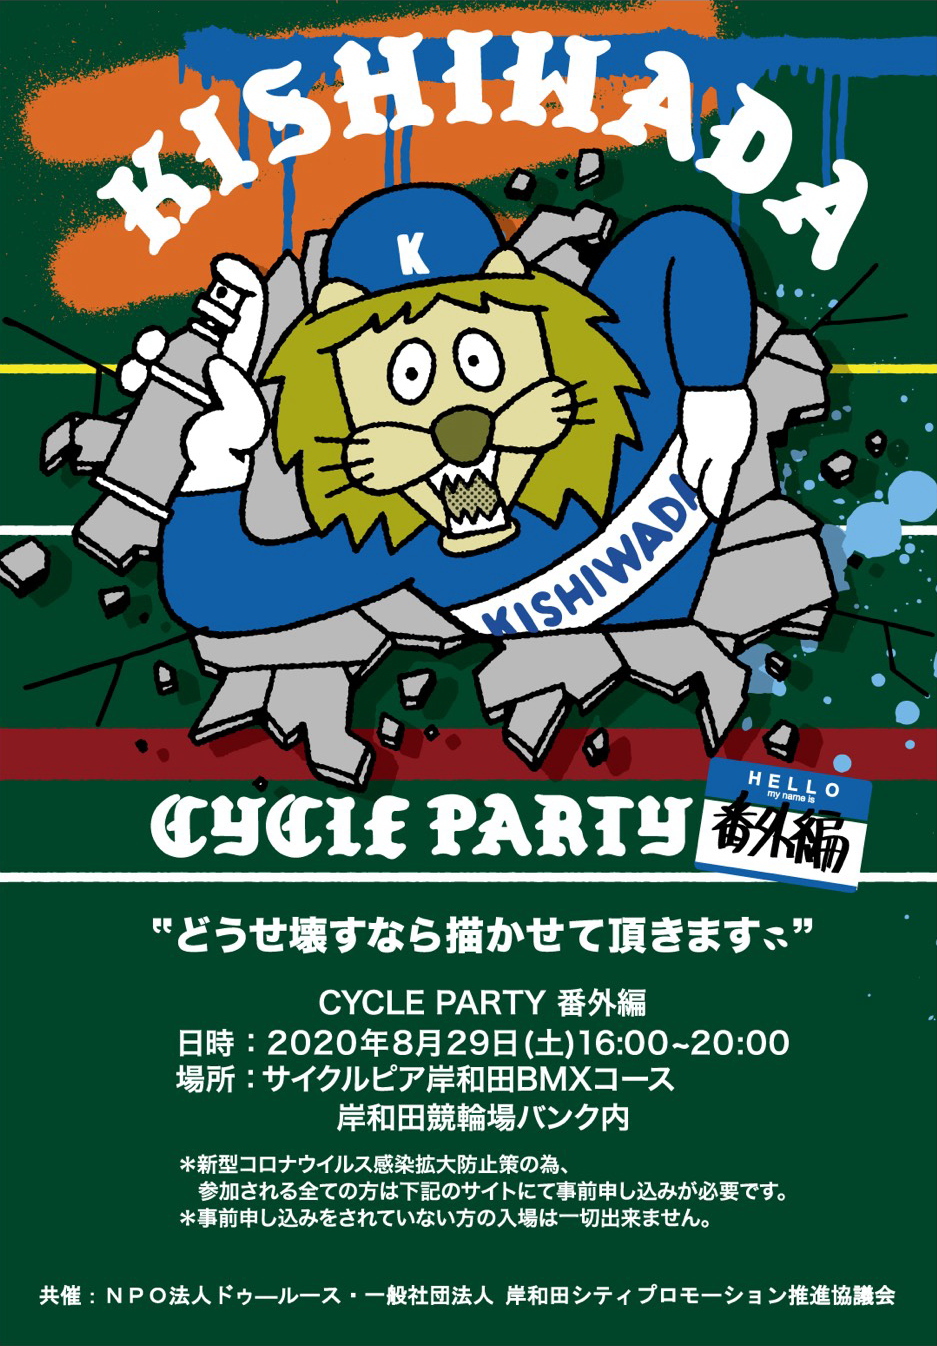 CYCLE PARTY 番外編